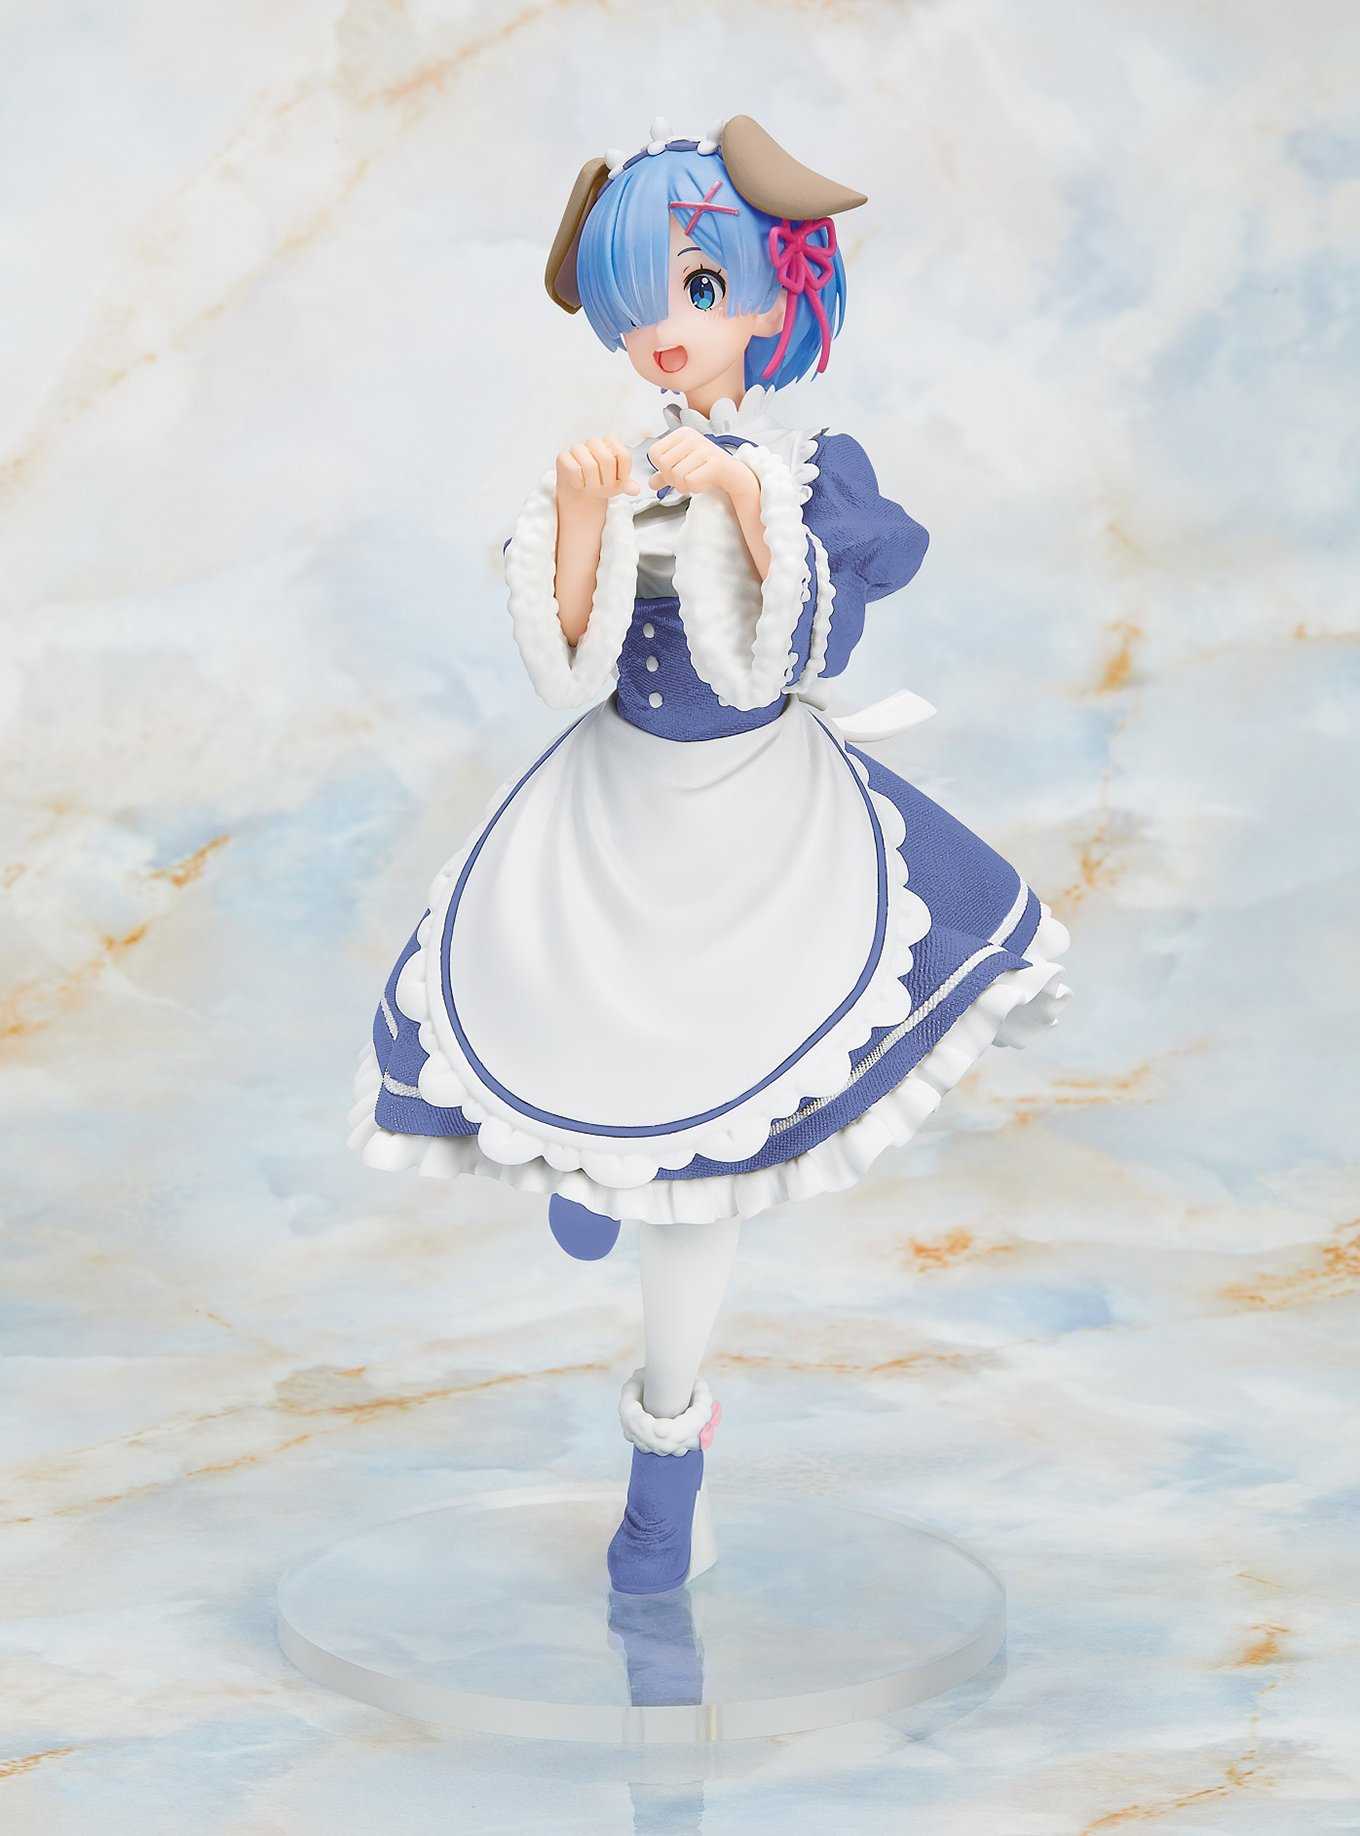 Taito Re:Zero Starting Life in Another World Coreful Rem (Renewal Edition) Figure (Memory Snow Puppy Ver.), , hi-res